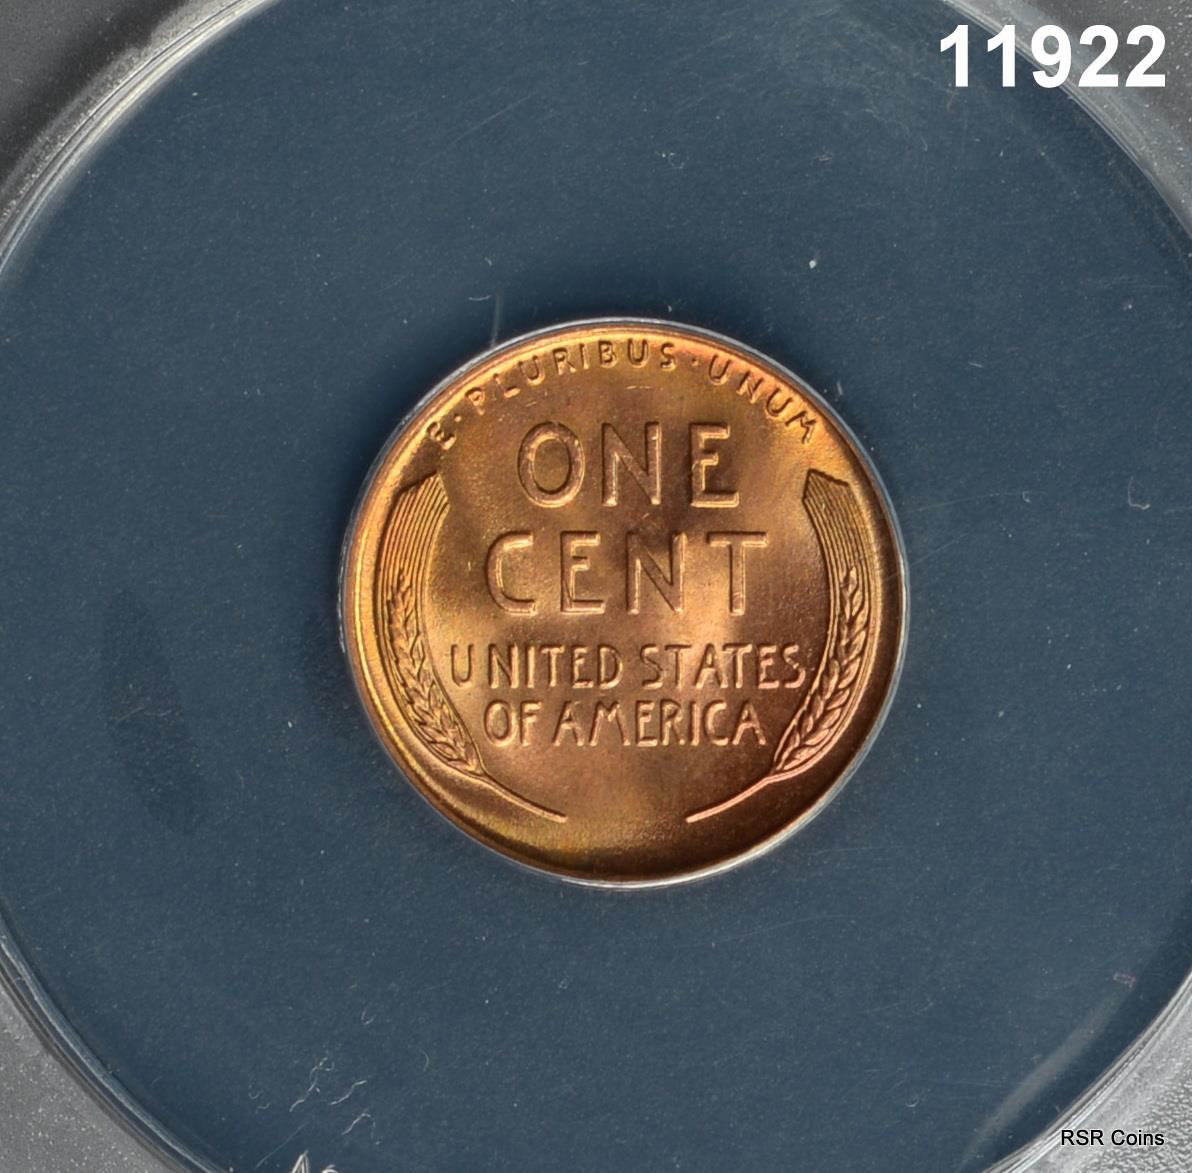 1947 LINCOLN CENT ANACS CERTIFIED MS66 RB #11922